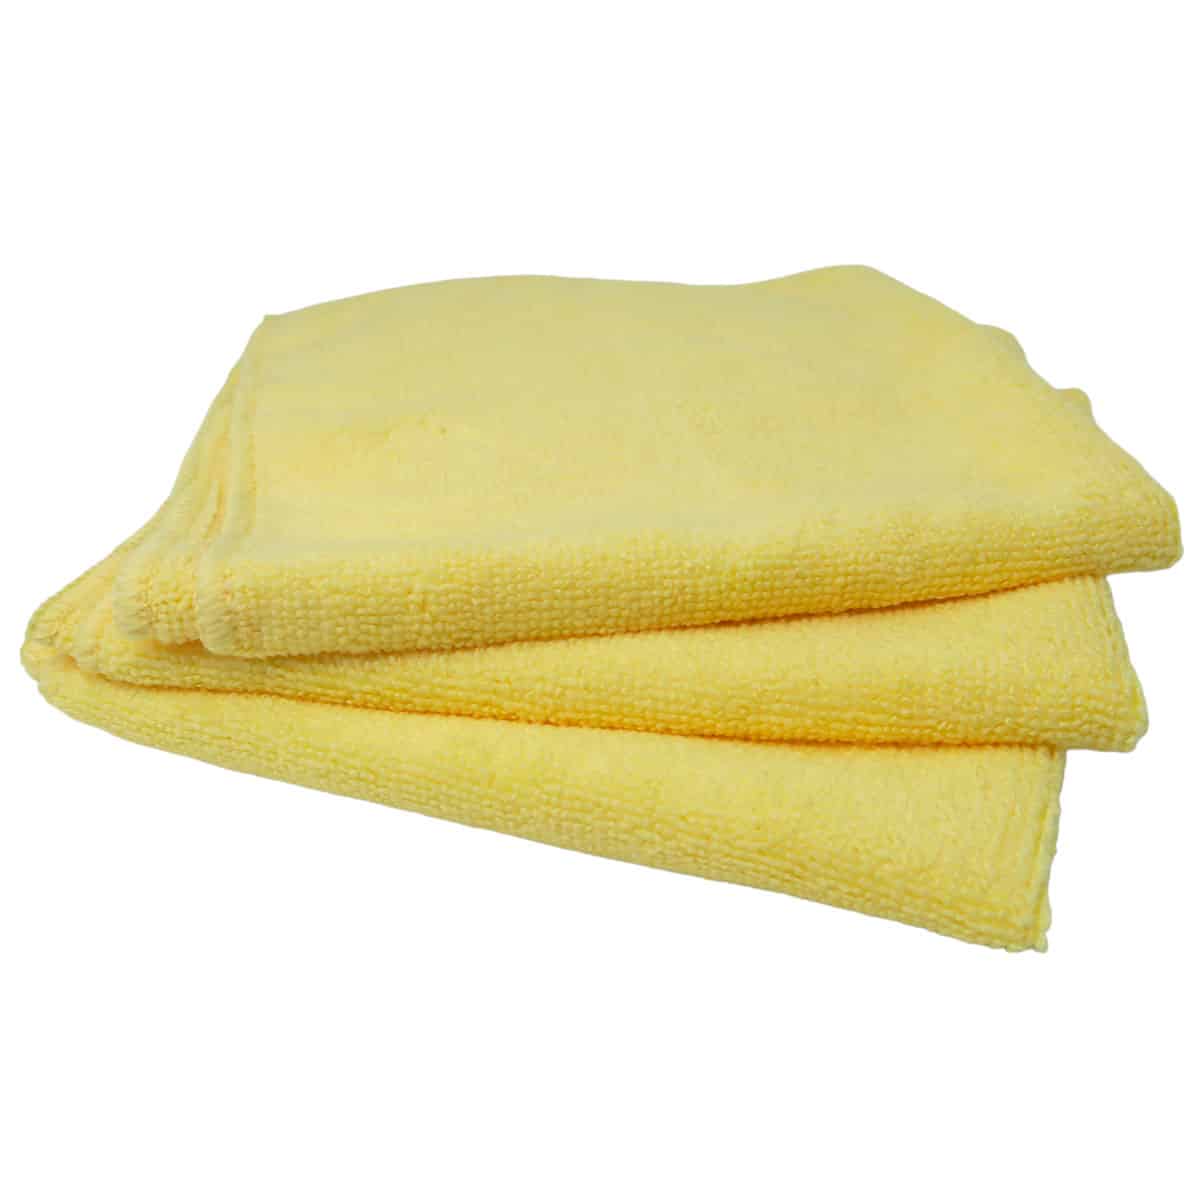 Chemical Guys Microfibre Towel Combo: Buy 2x Super Absorber Waffle Drying Towels & Get 3x Super Soft Cleaning Towels FREE 5